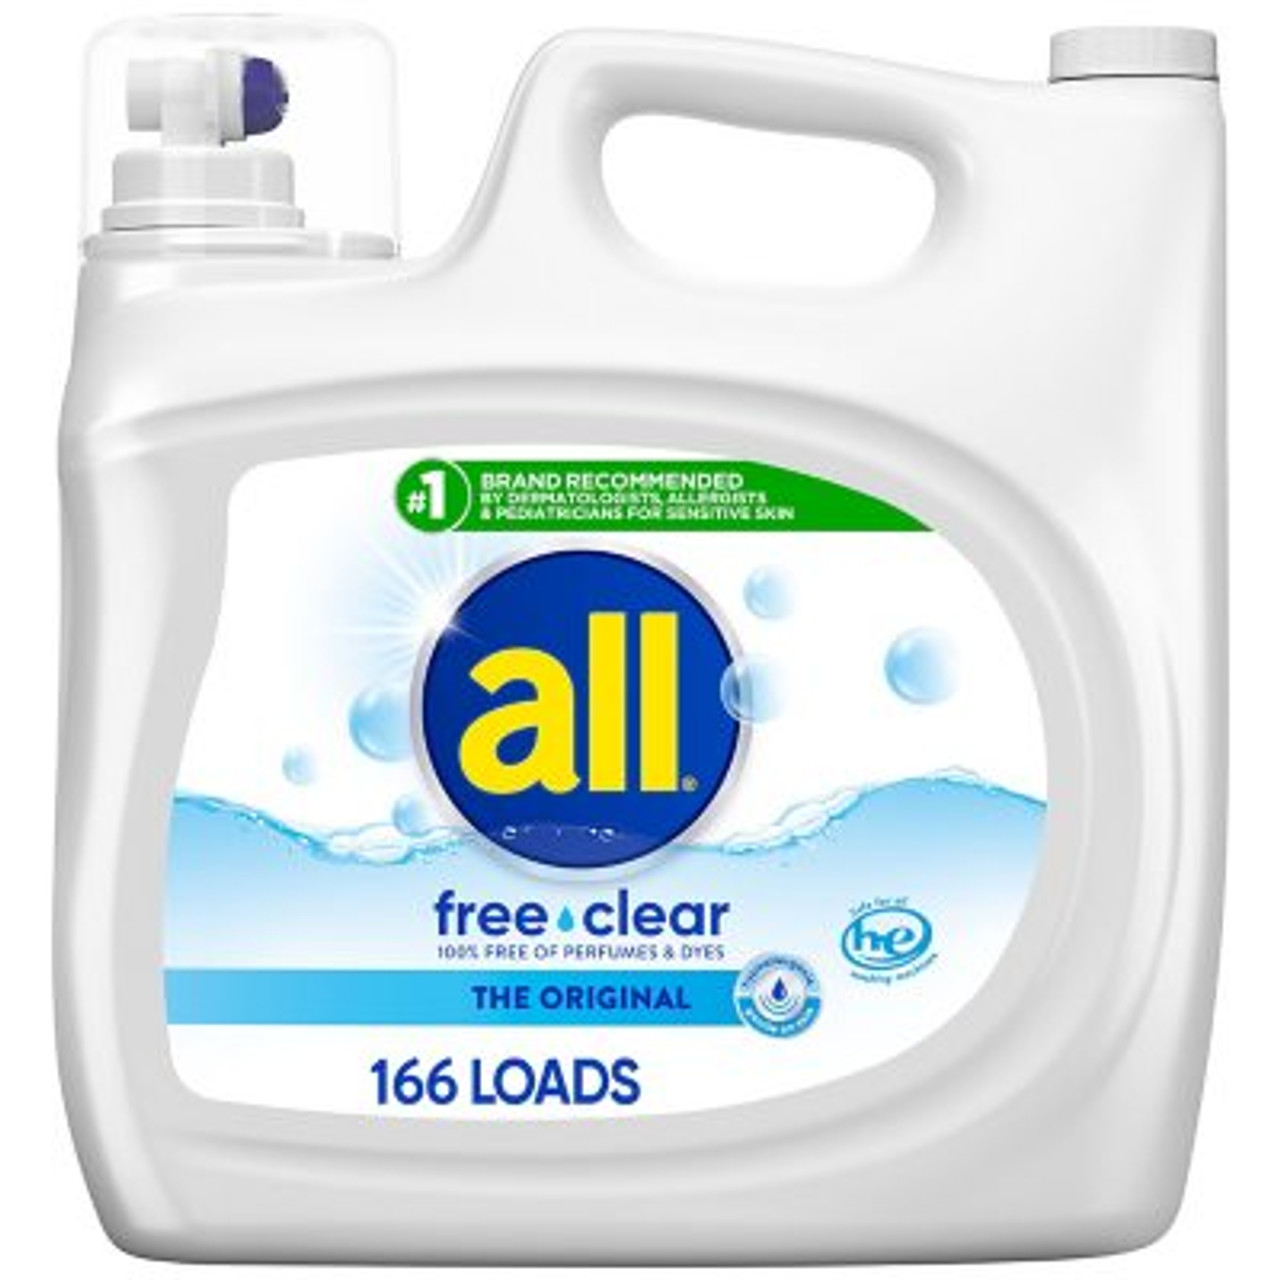 All Liquid Laundry Detergent Free Clear for Sensitive Skin (250 oz.,166 loads) - [From 91.00 - Choose pk Qty ] - *Ships from Miami